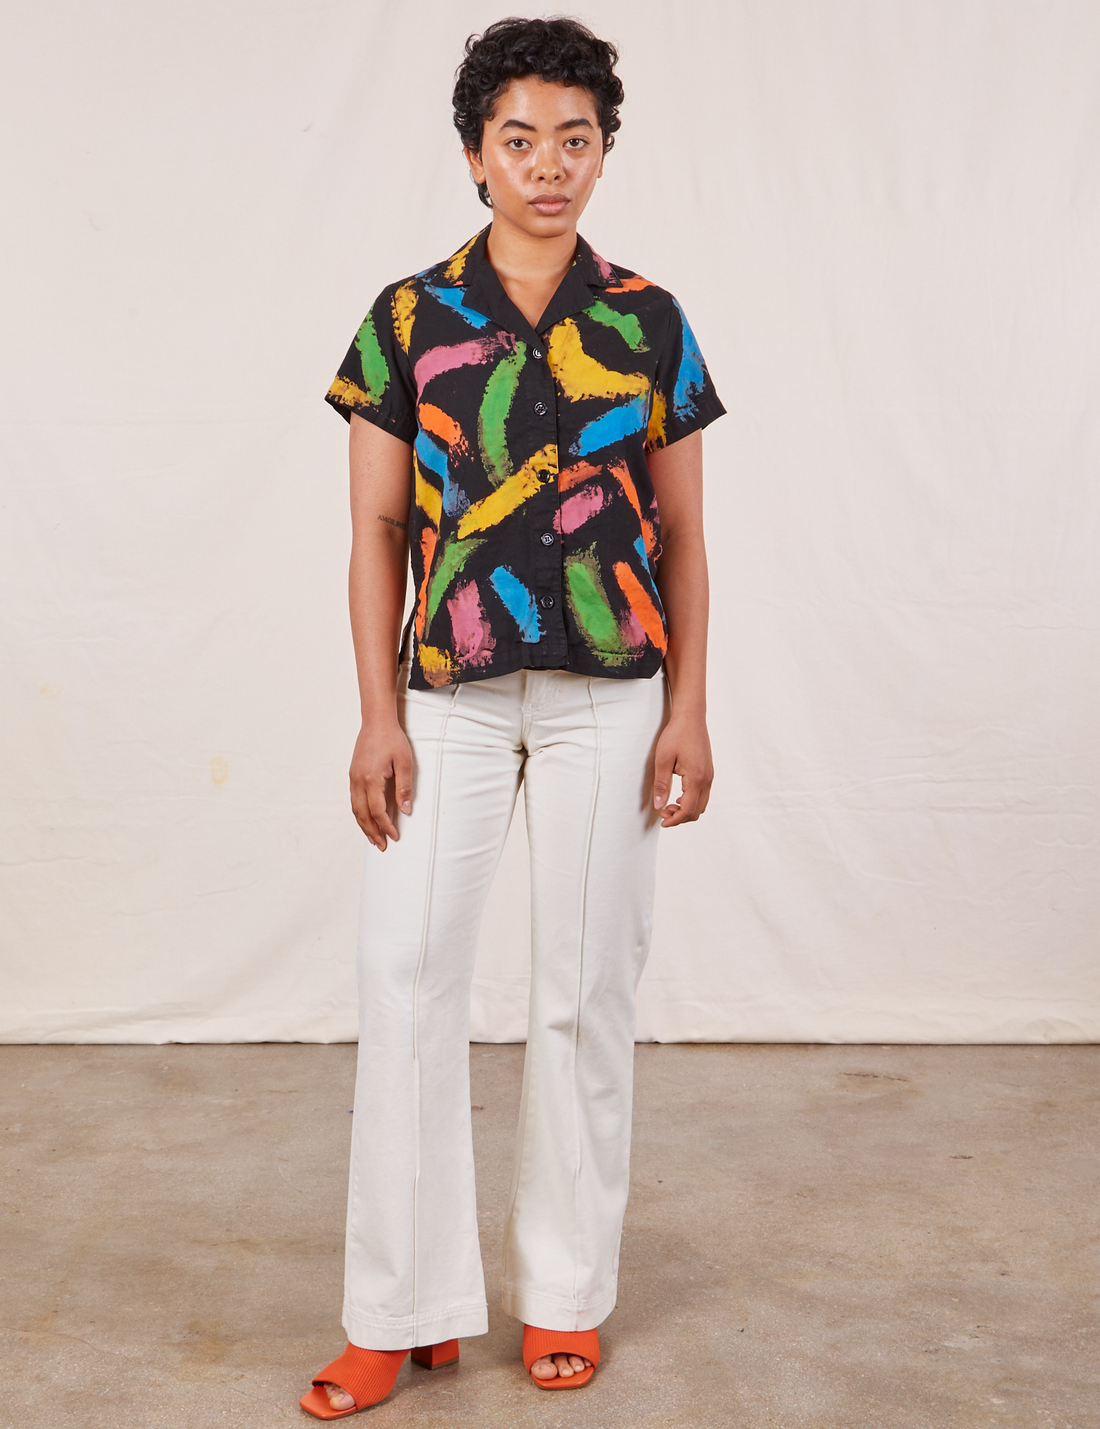 Mika is wearing Pantry Button Up in Paint Stroke and vintage off-white Western Pants